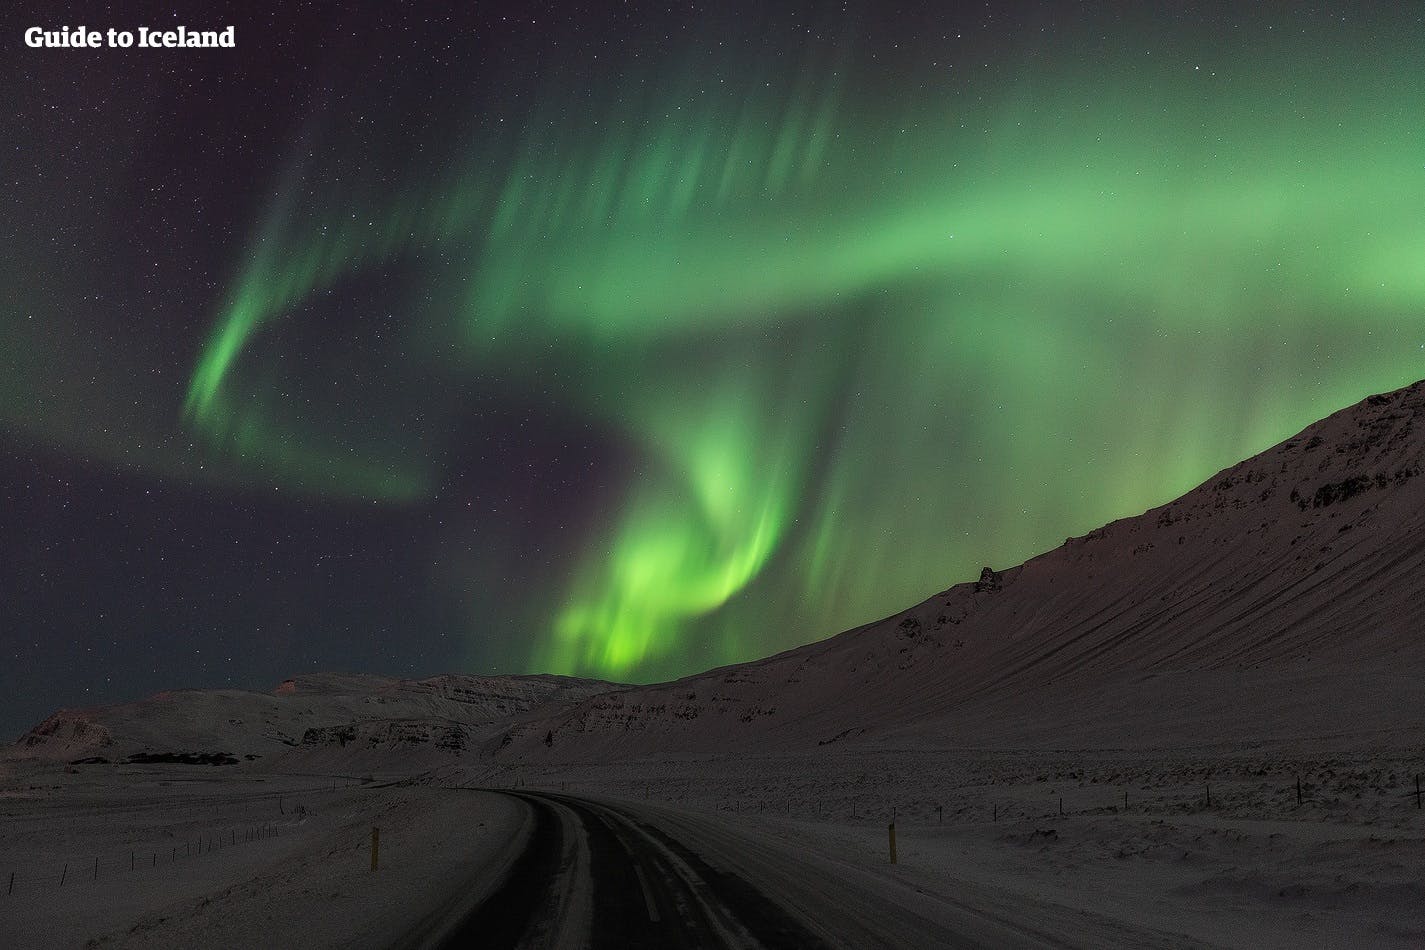 Travel to Iceland during winter and see the Northern Lights spiralling in the sky above you.